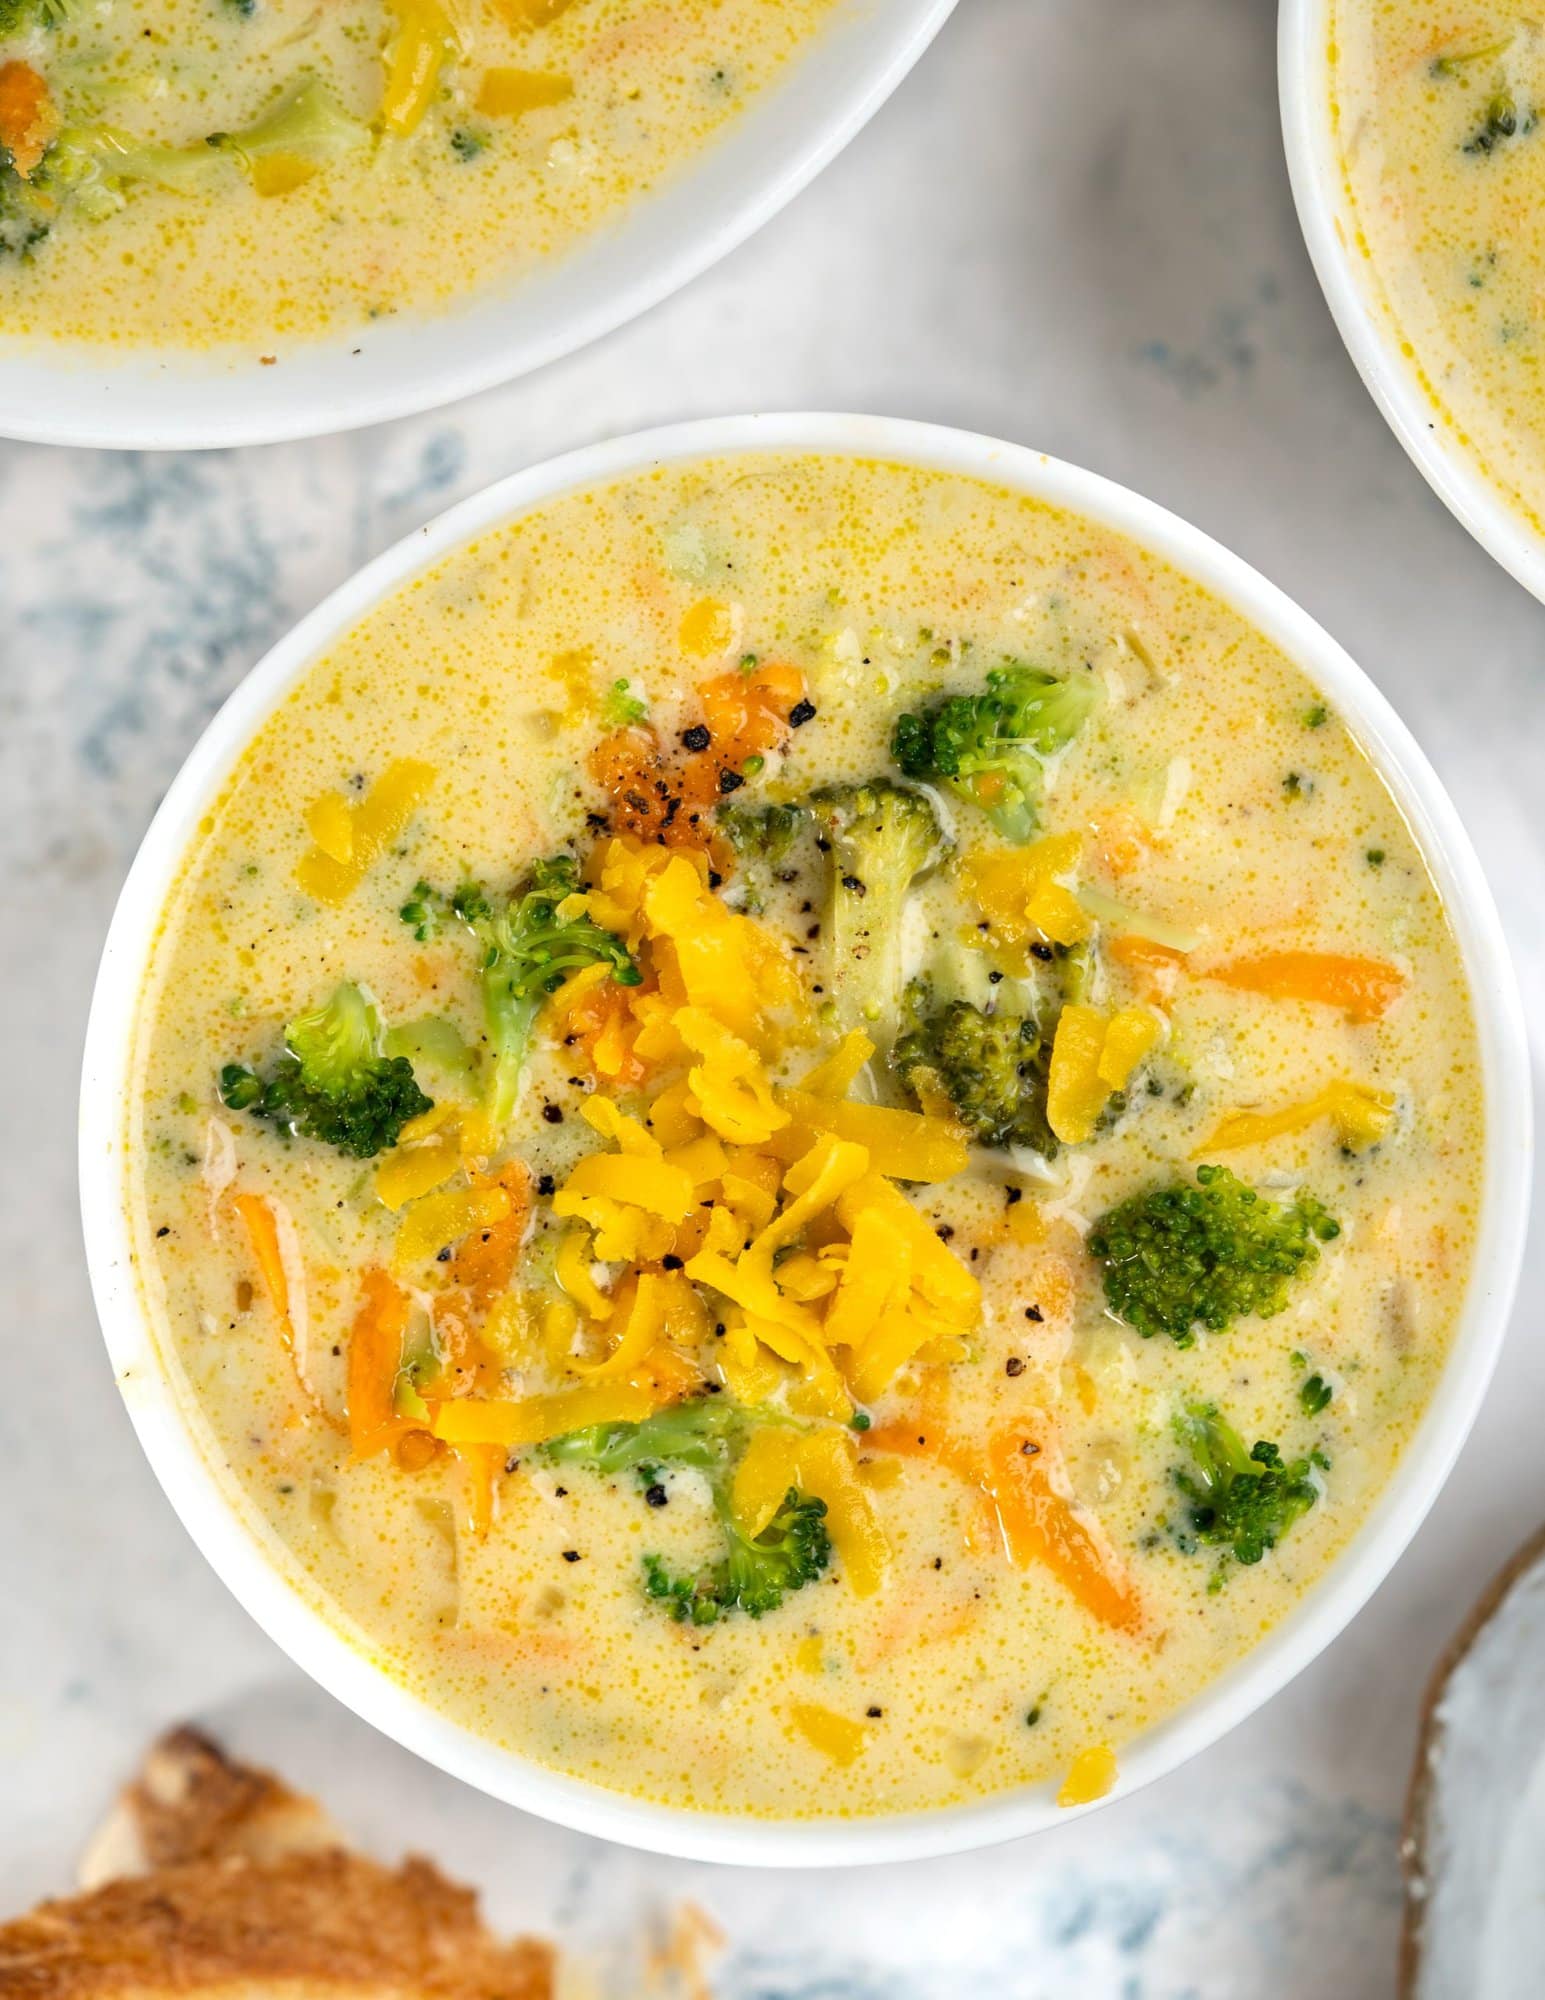 Shredded cheddar and pepper is sprinkled on top of broccoli cheddar cheese soup, served inn a white soup bowl.